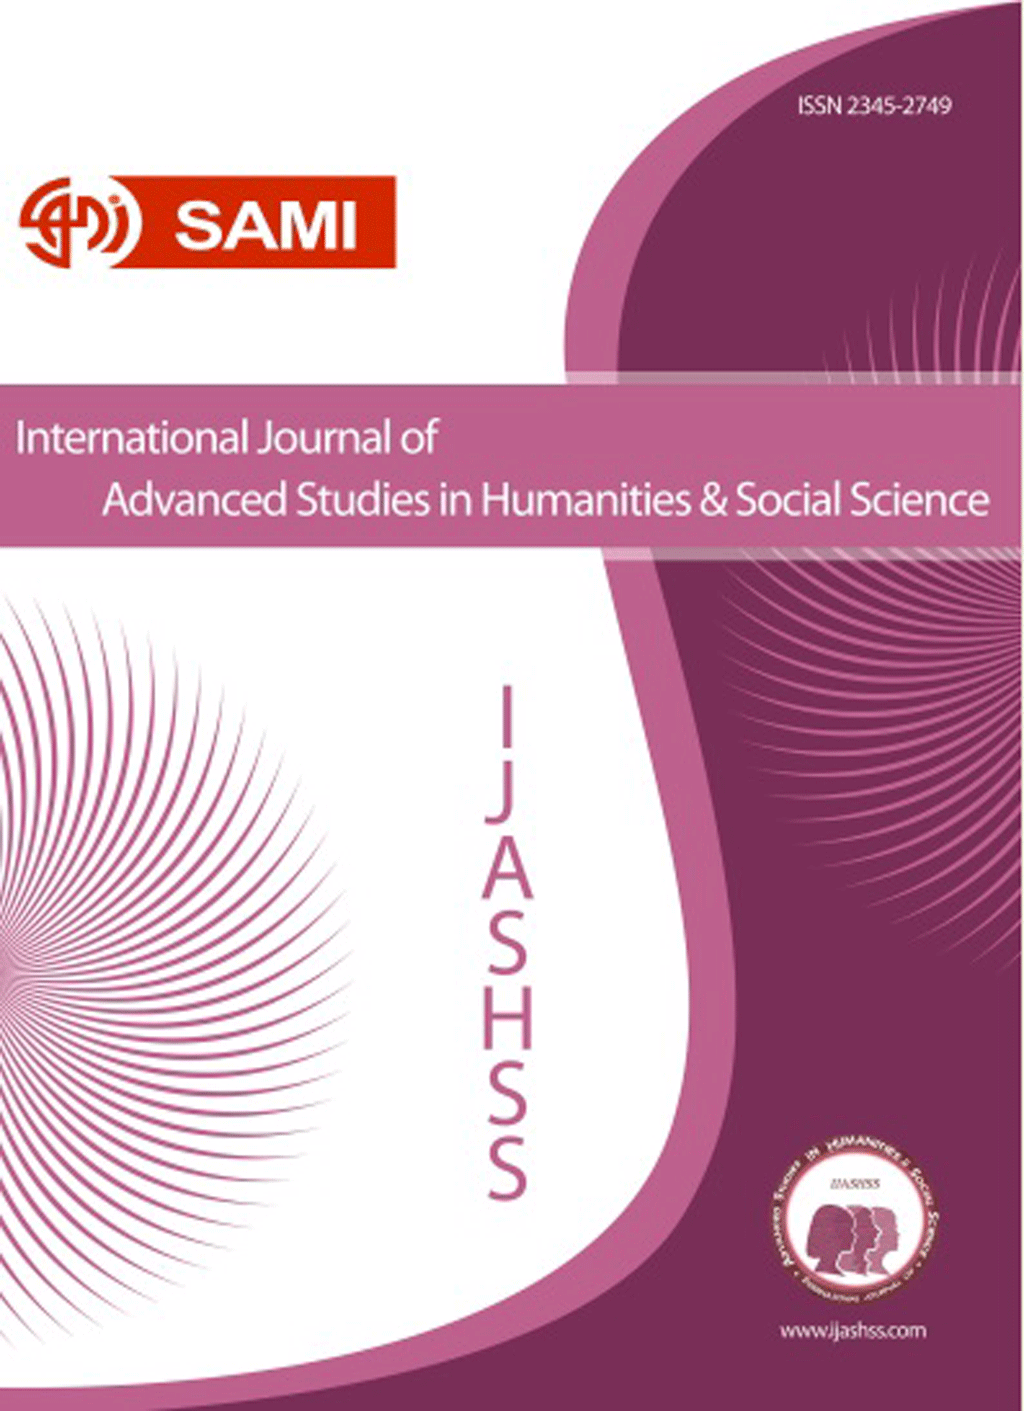 International Journal of Advanced Studies in Humanities and Social Science - July 2020, Volume 9 - Issue 3